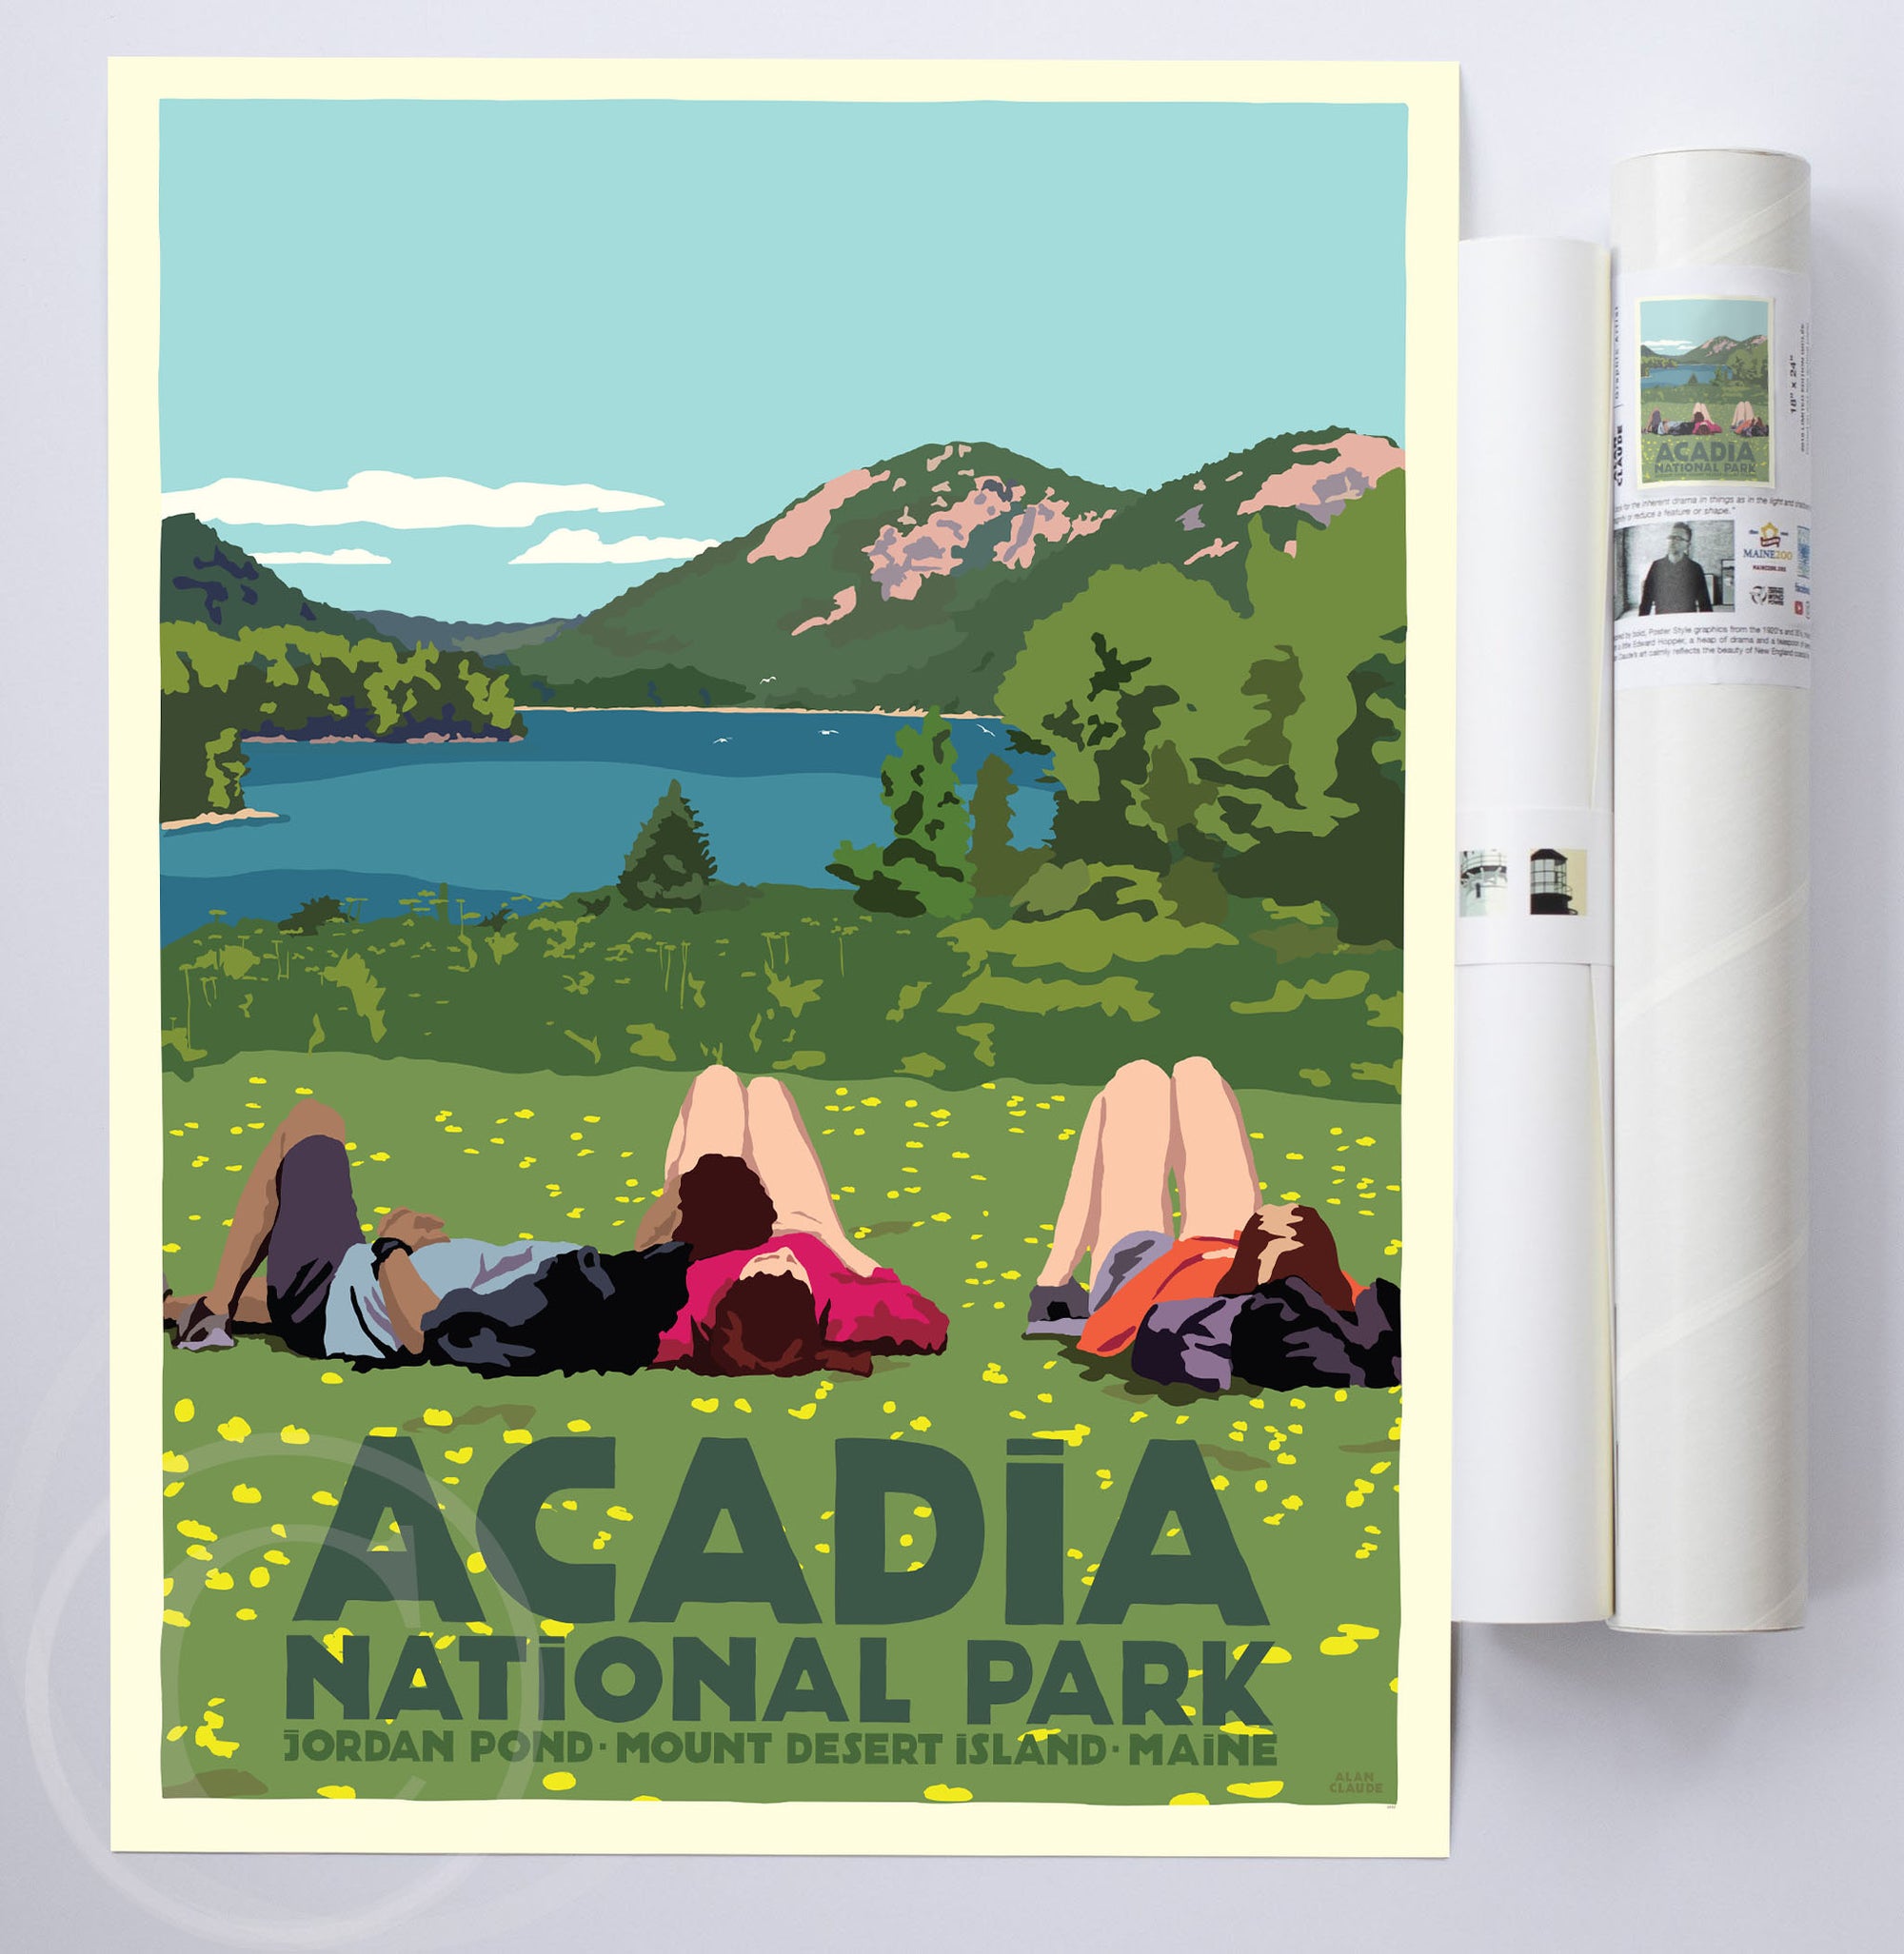 Hikers In Acadia National Park Art Print 18" x 24" Wall Poster By Alan Claude - Maine